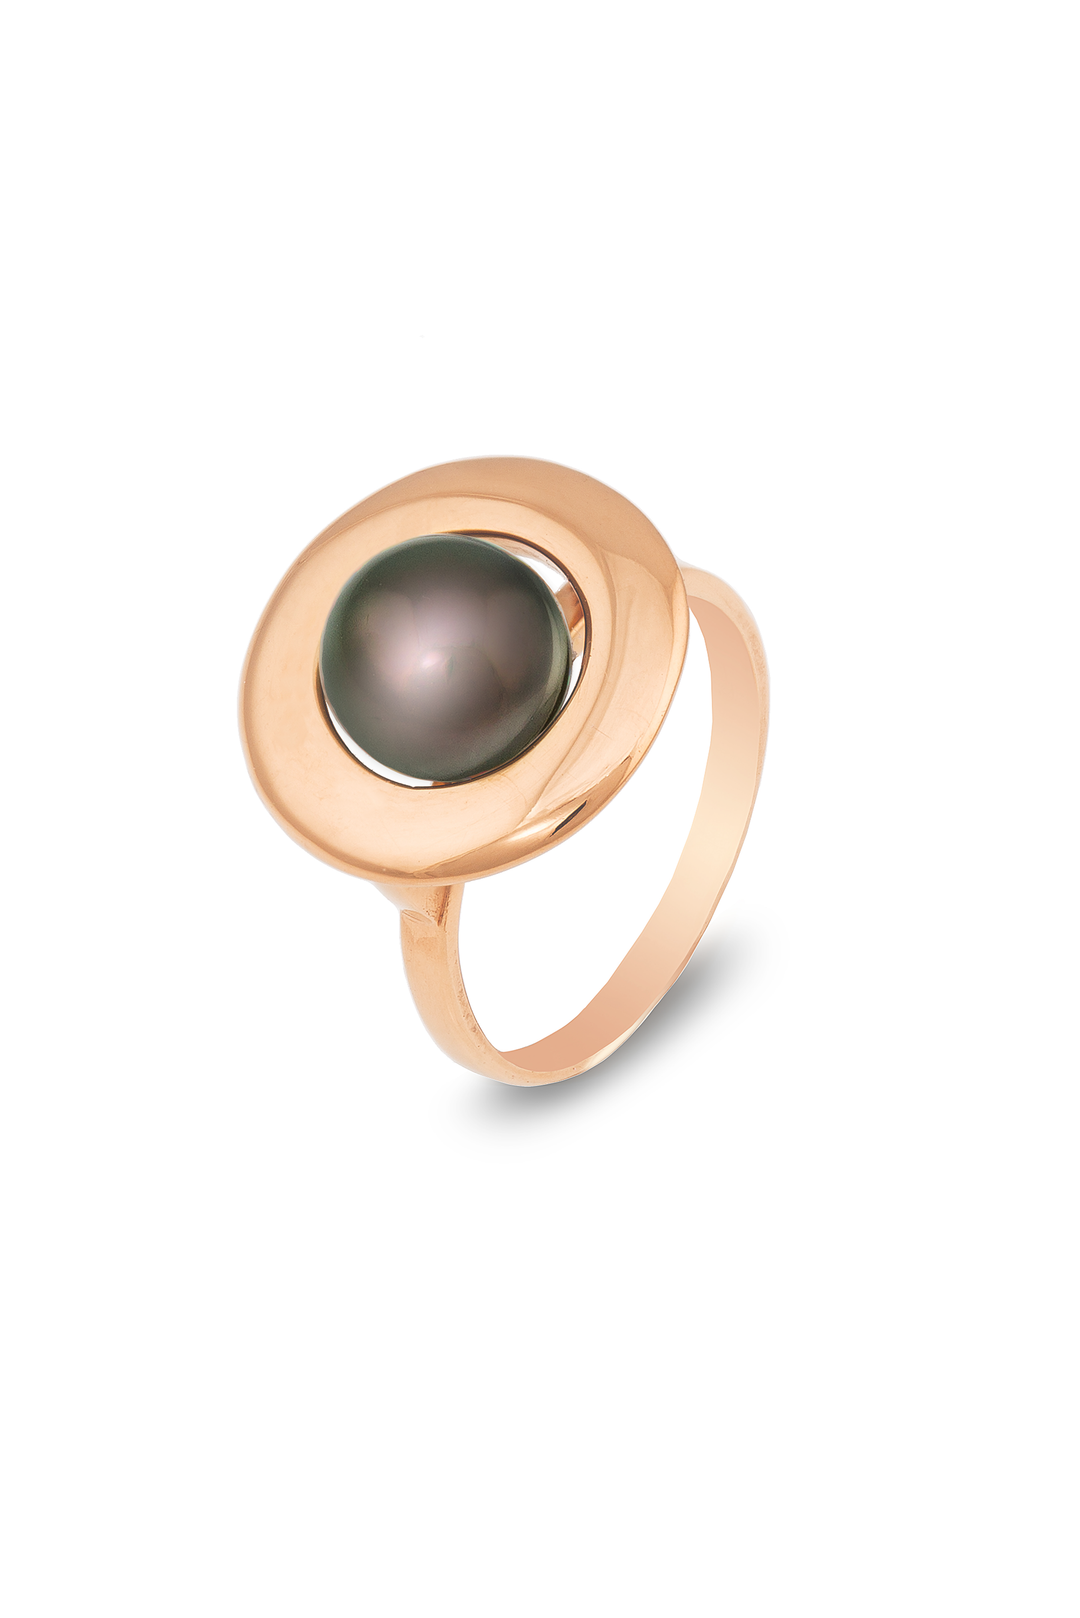 Home Planet 9ct Gold Tahitian Pearl Ring